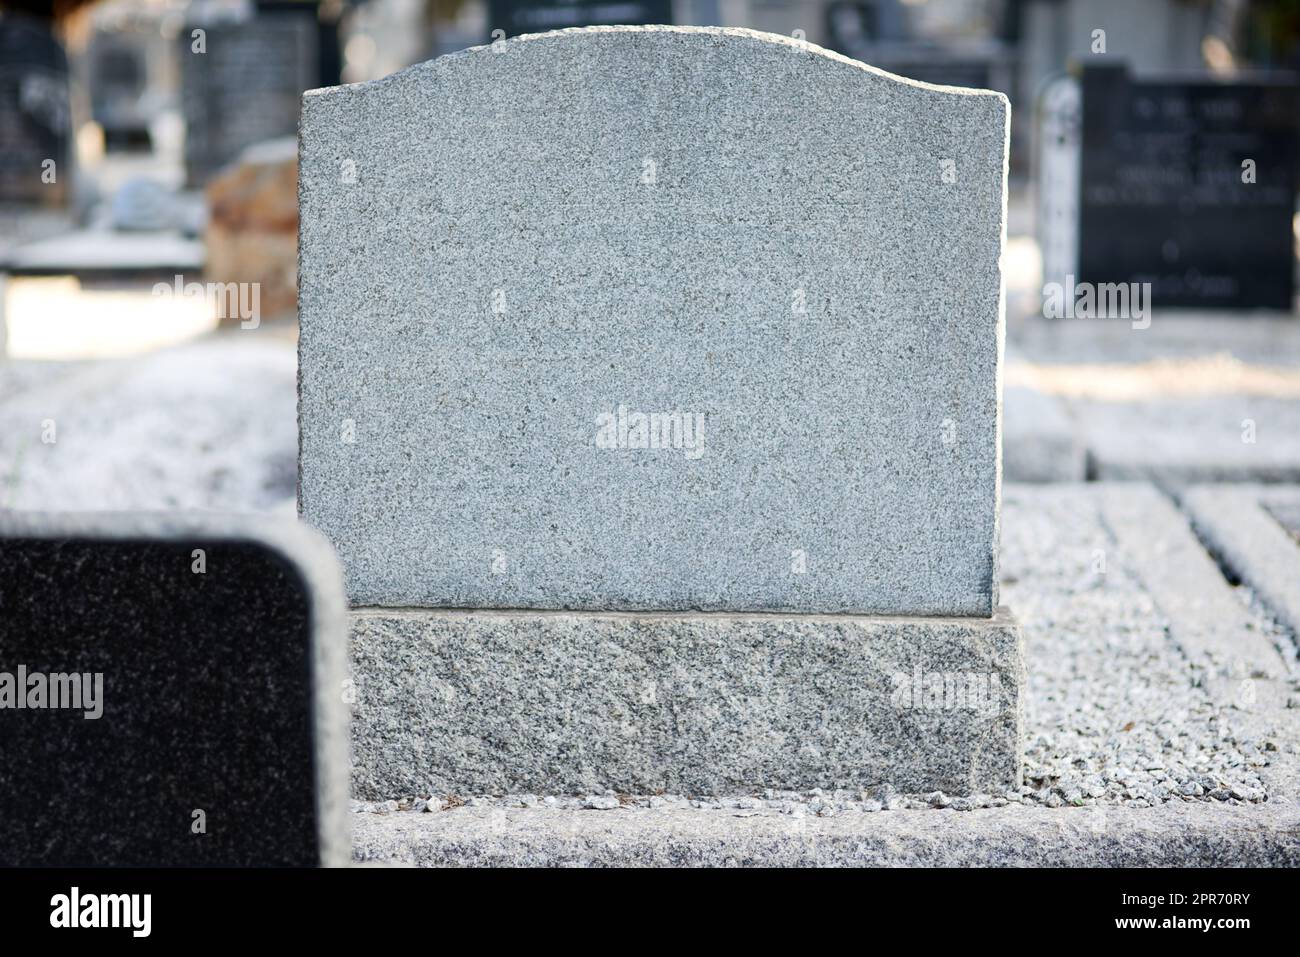 Rest in peace. Shot of a gravestone in a cemetery. Stock Photo